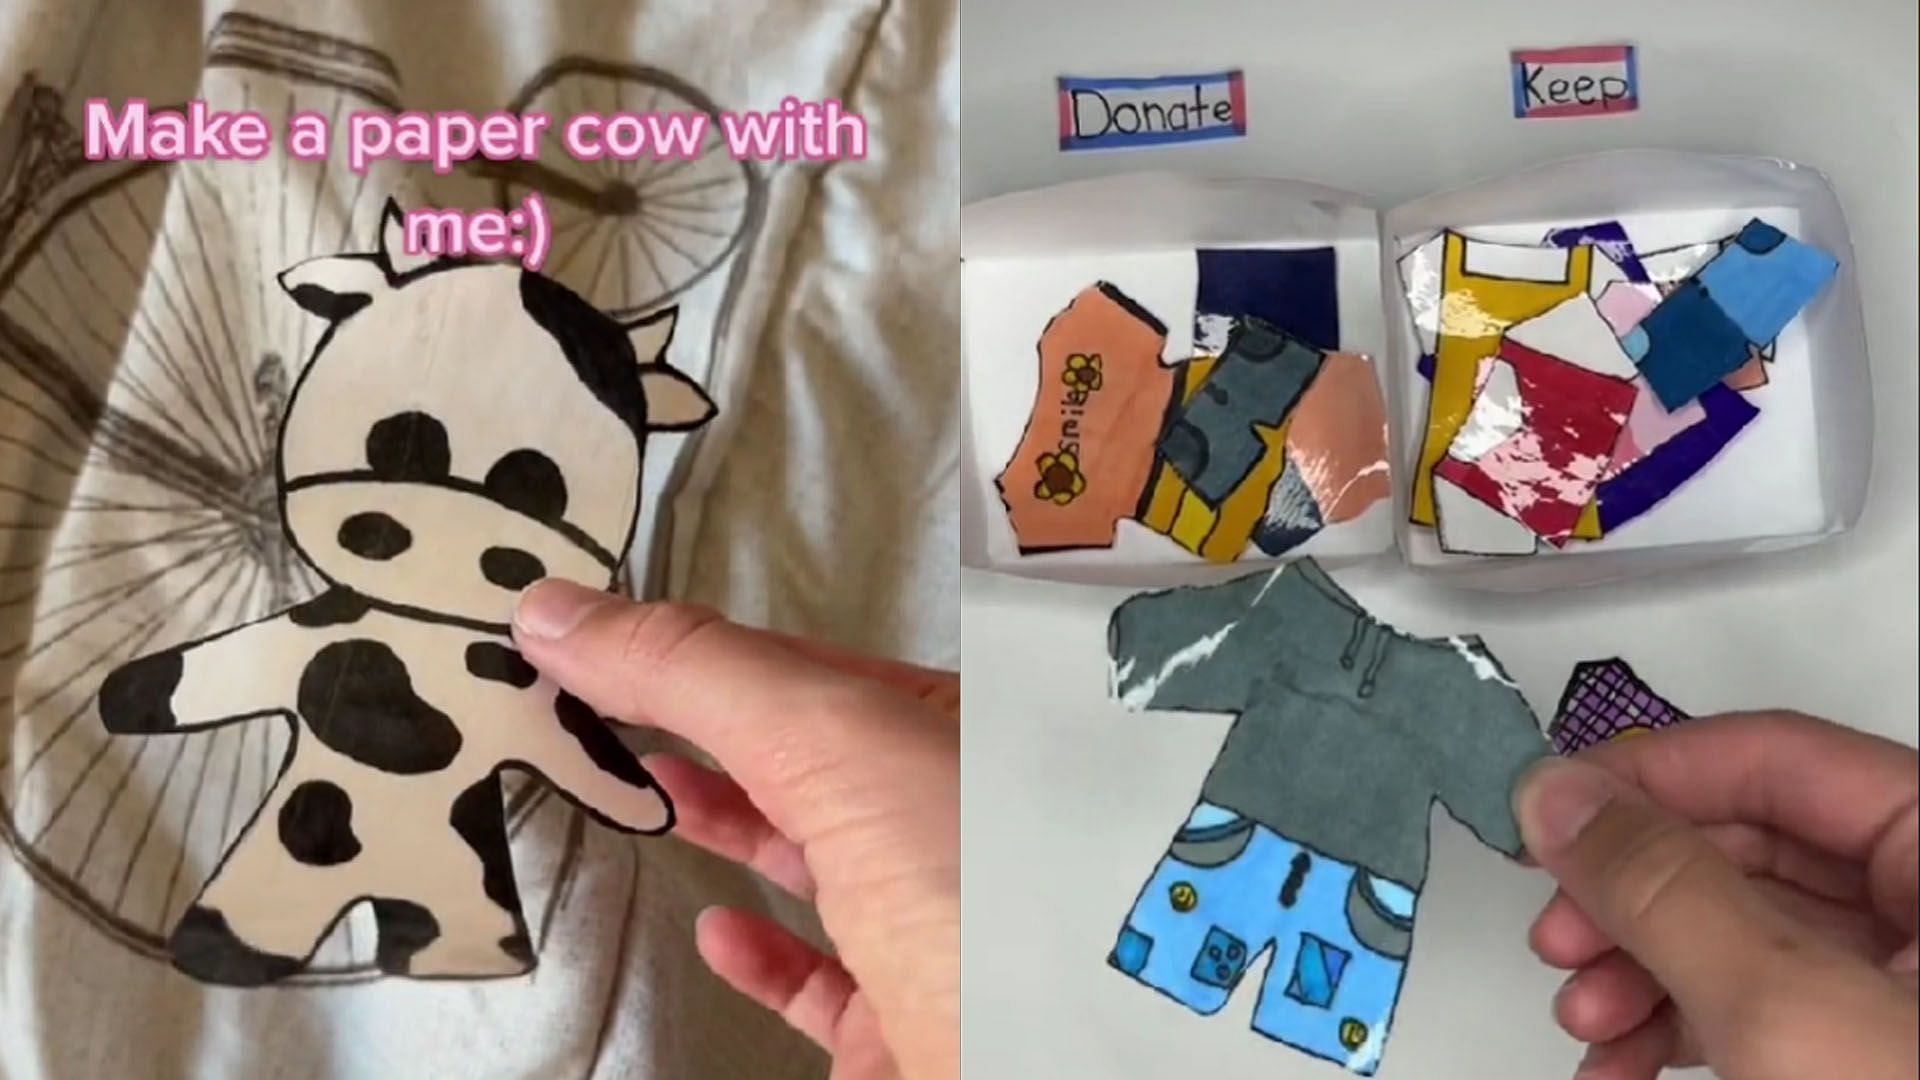 How to make your own paper cow? TikTok DIY trend goes viral on platform